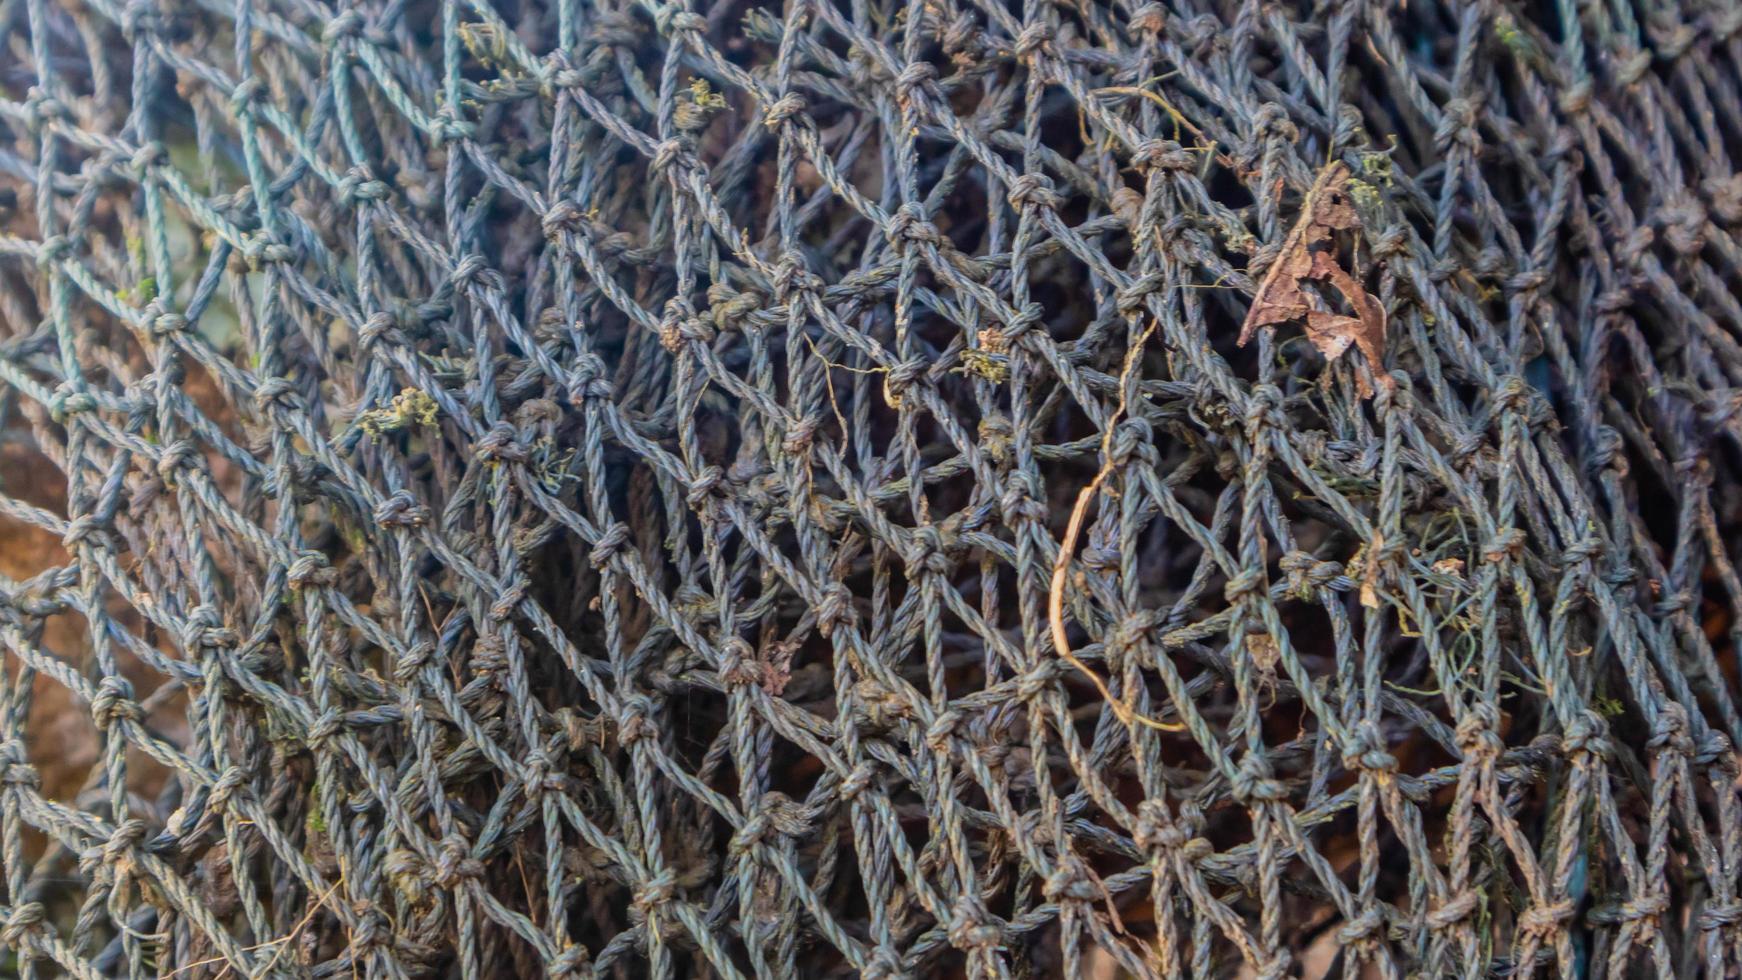 fish mesh texture as background photo